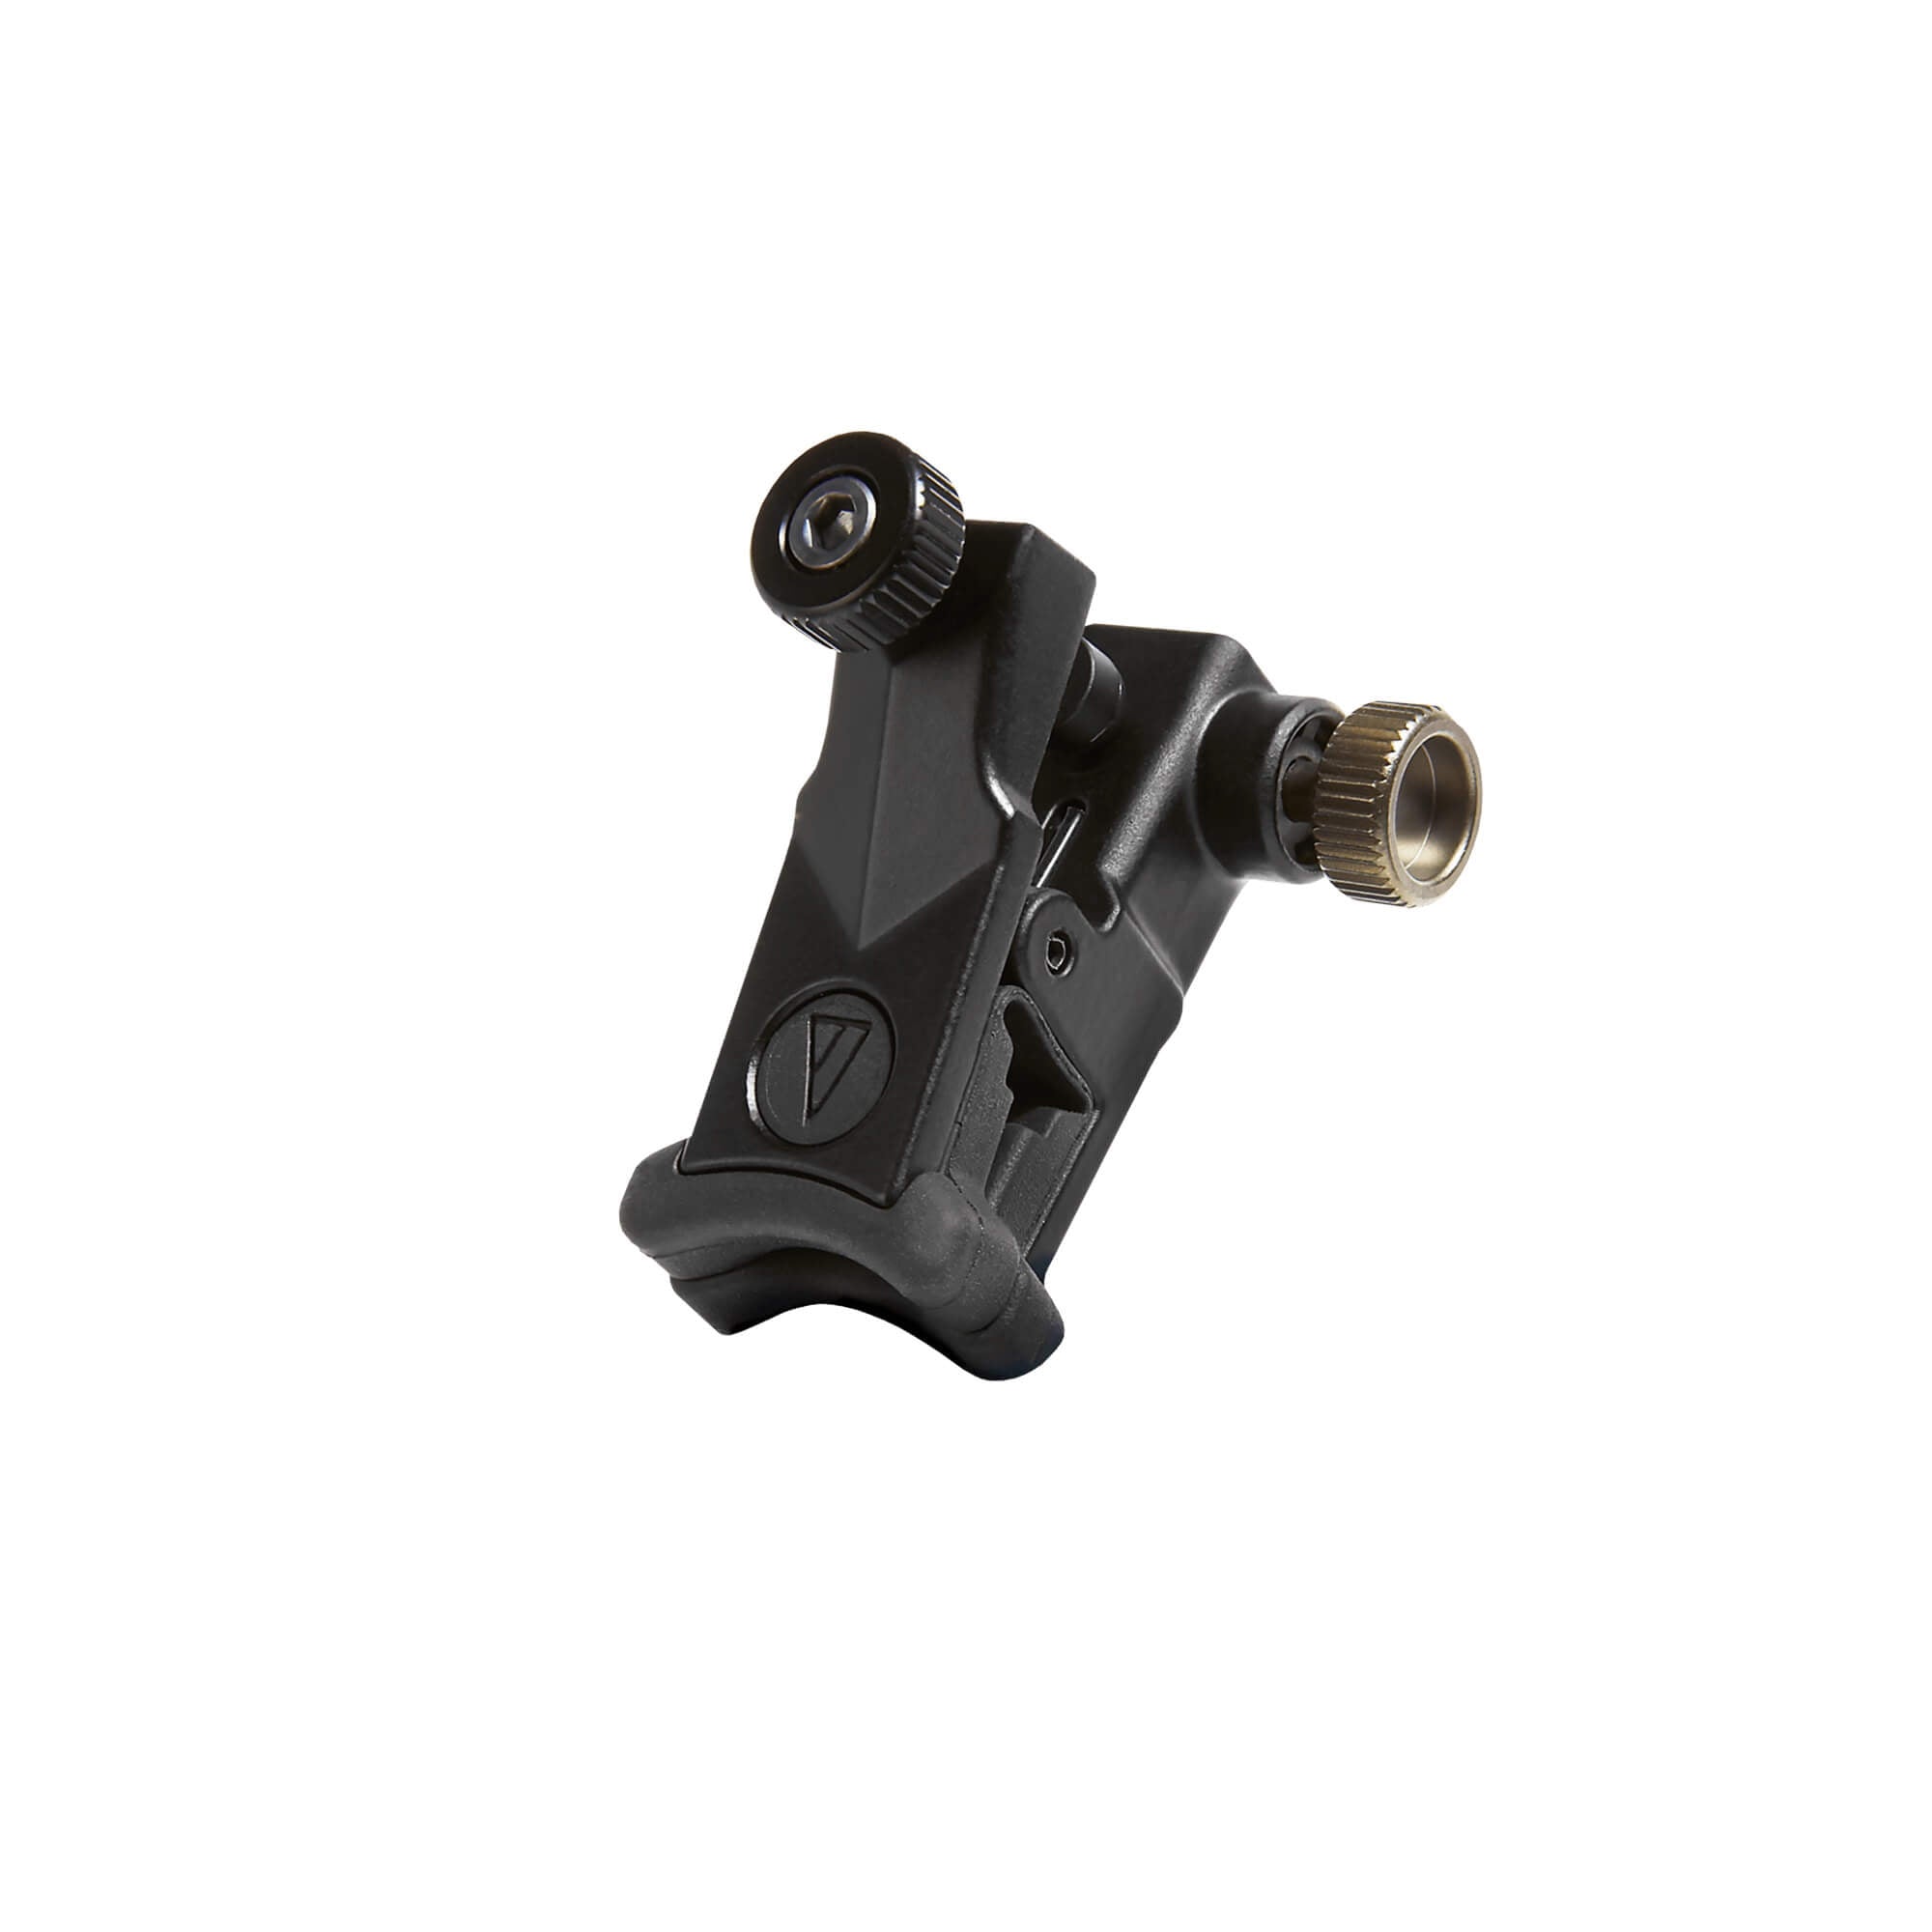 Audio-Technica ATM350U, universal clip-on mounting system